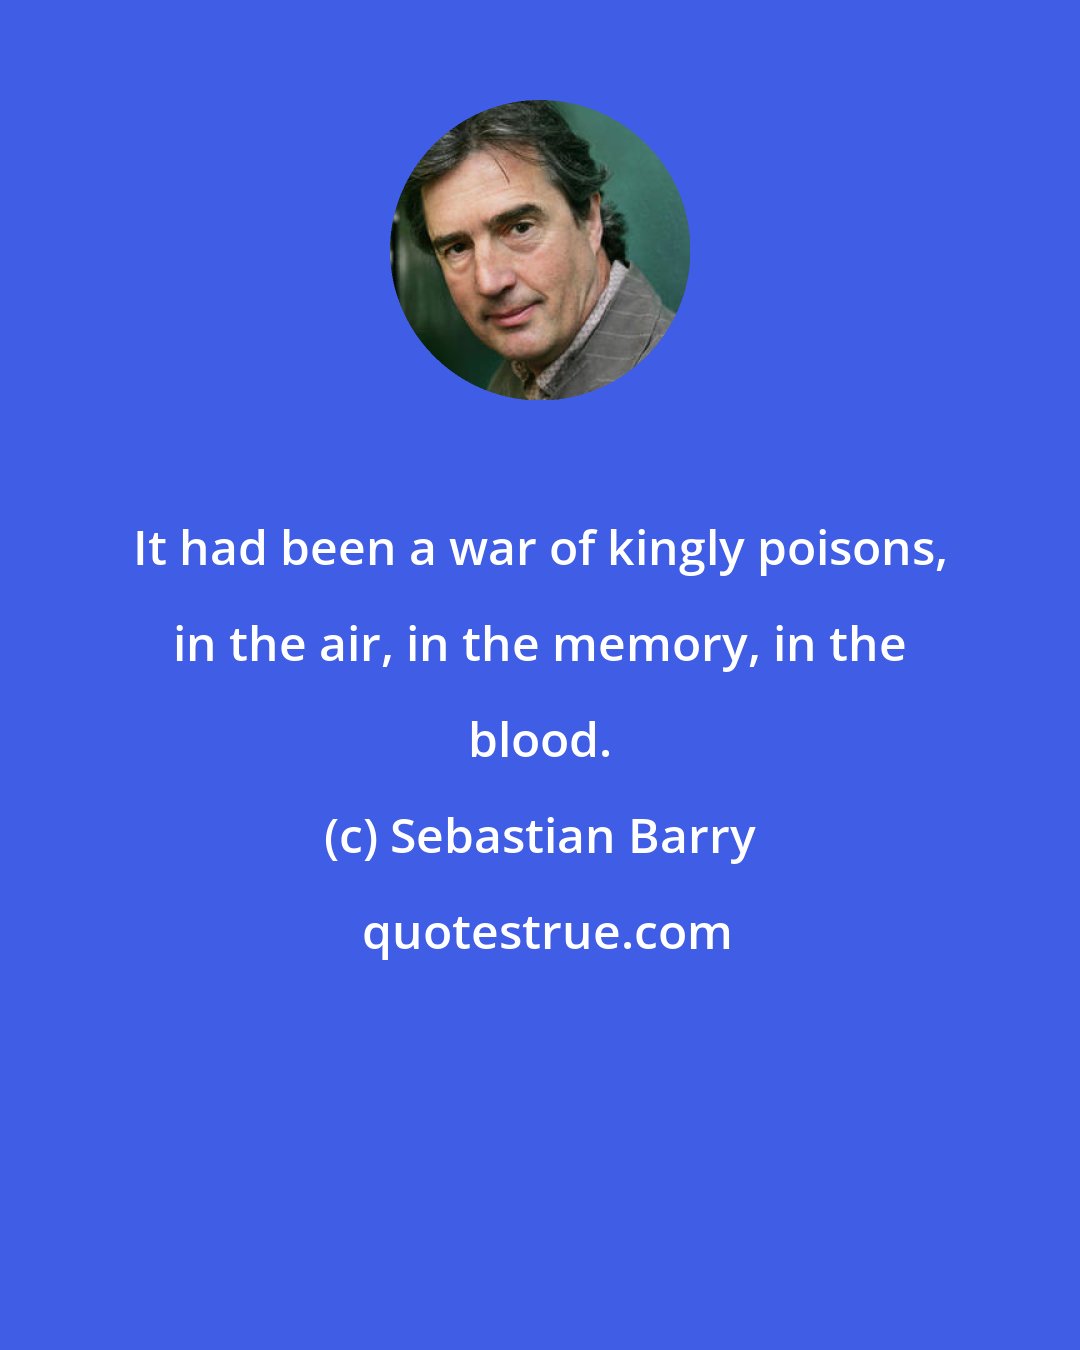 Sebastian Barry: It had been a war of kingly poisons, in the air, in the memory, in the blood.